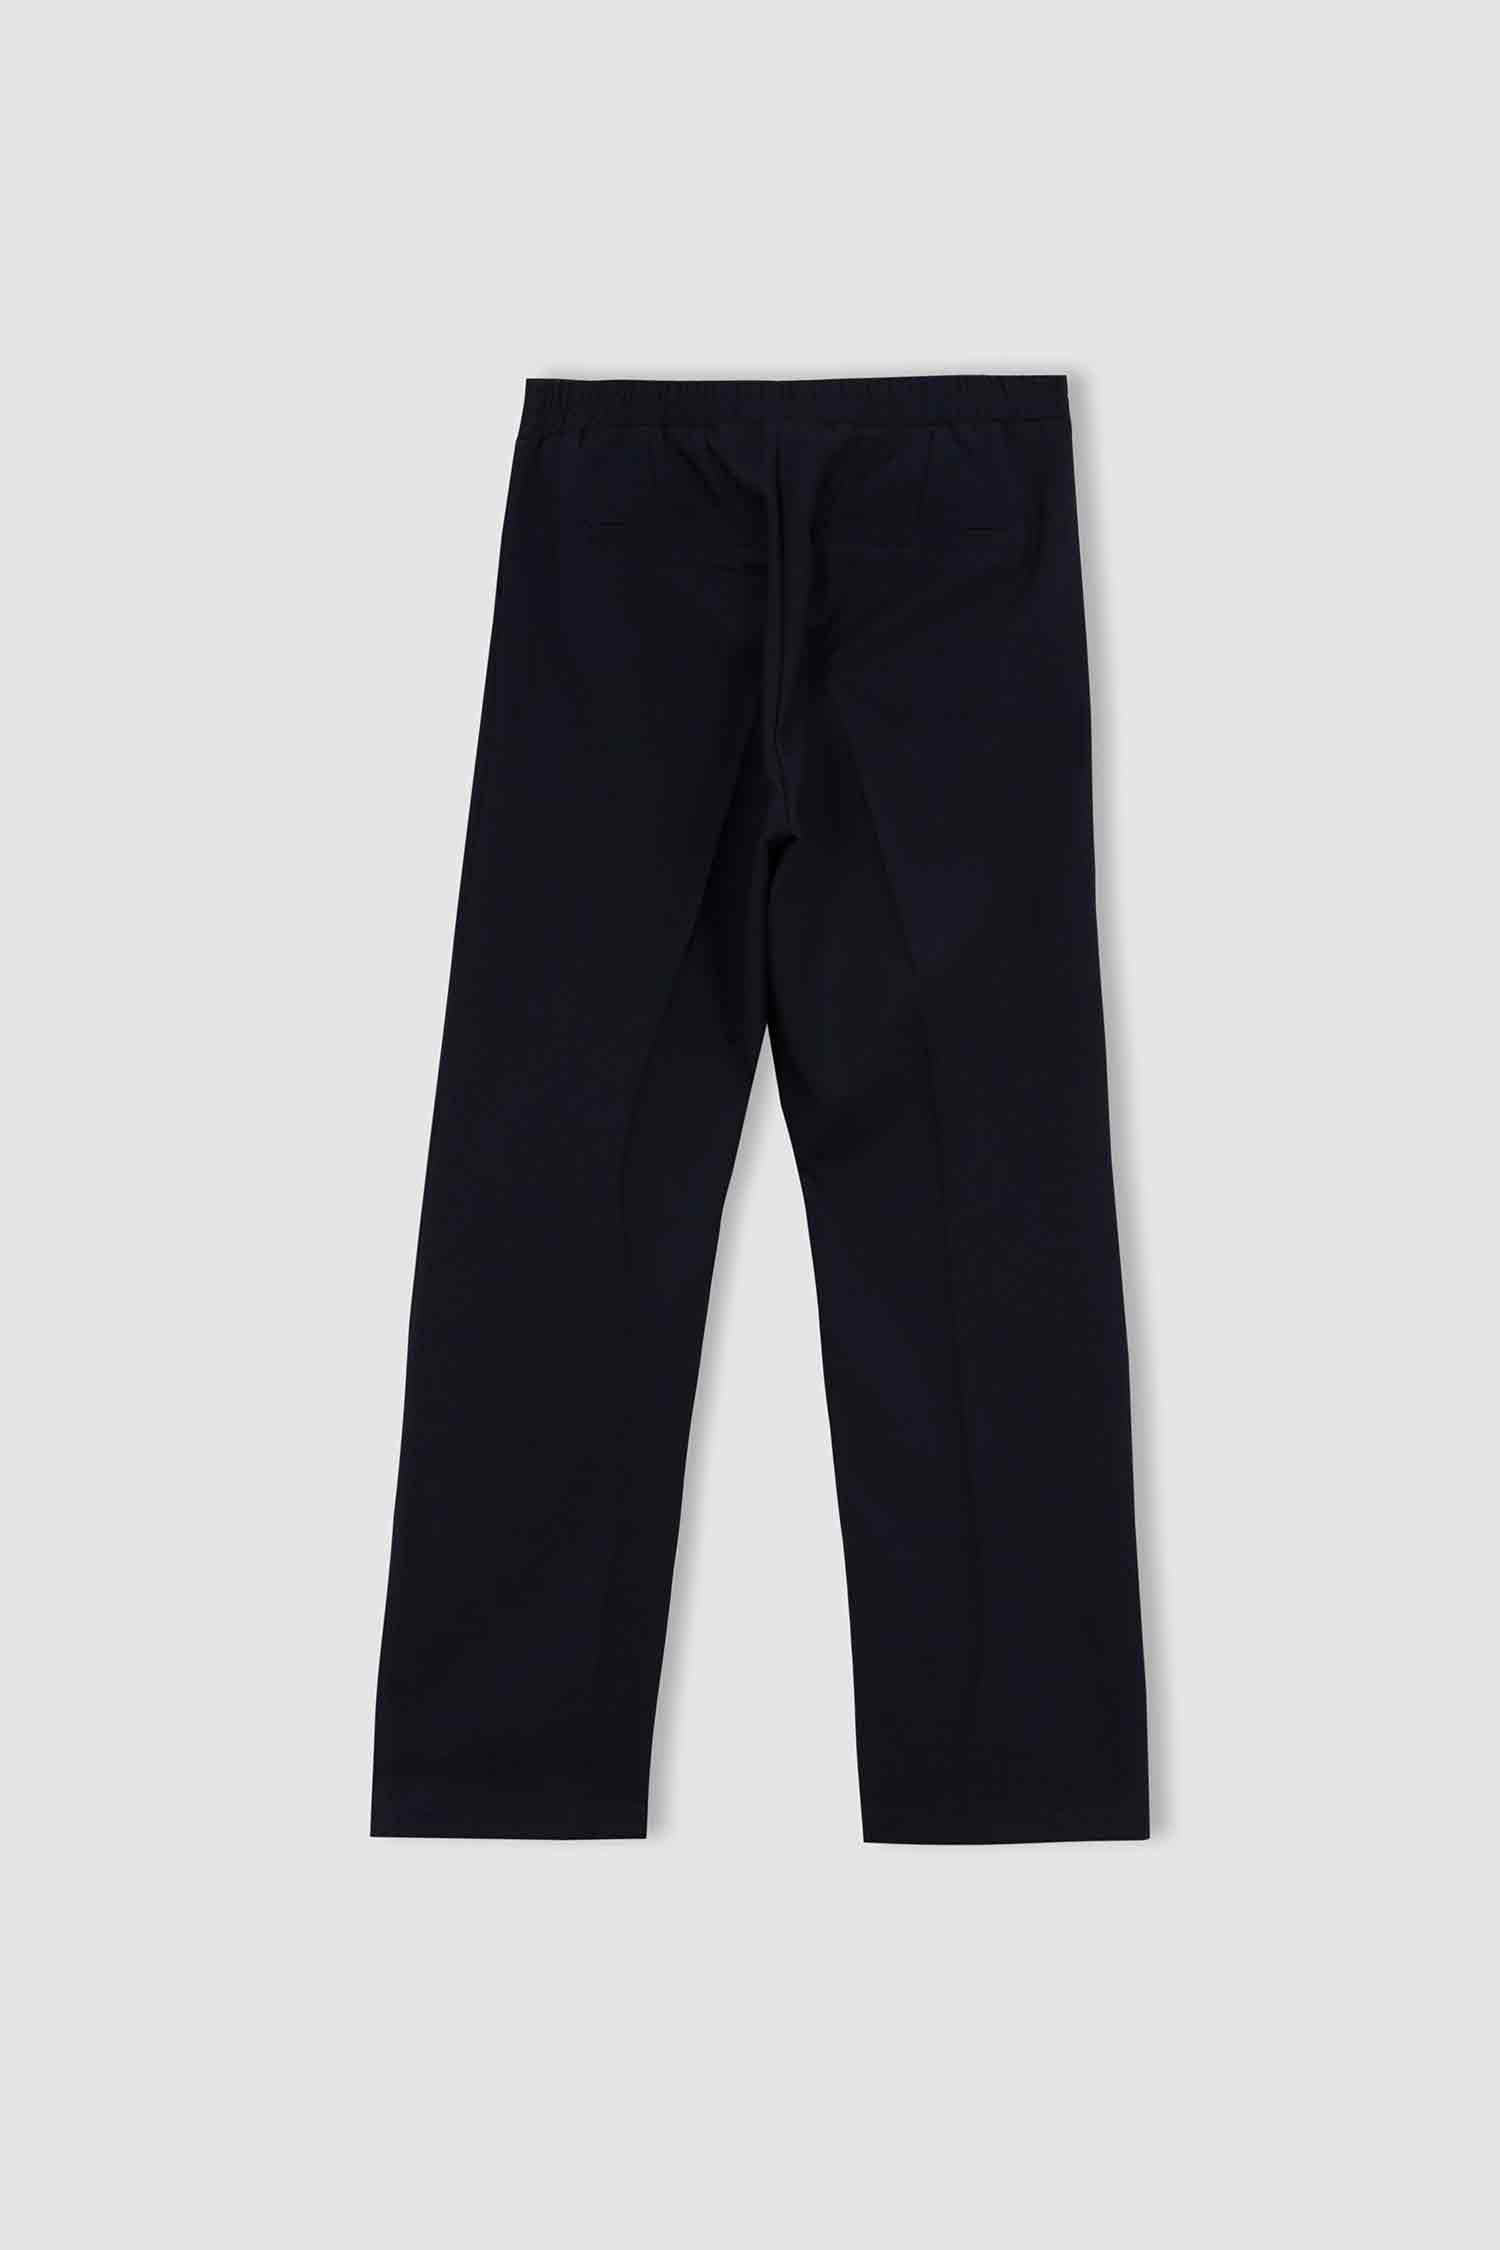 Navy WOMAN Carrot Fit With Pockets Trousers 2716615 | DeFacto